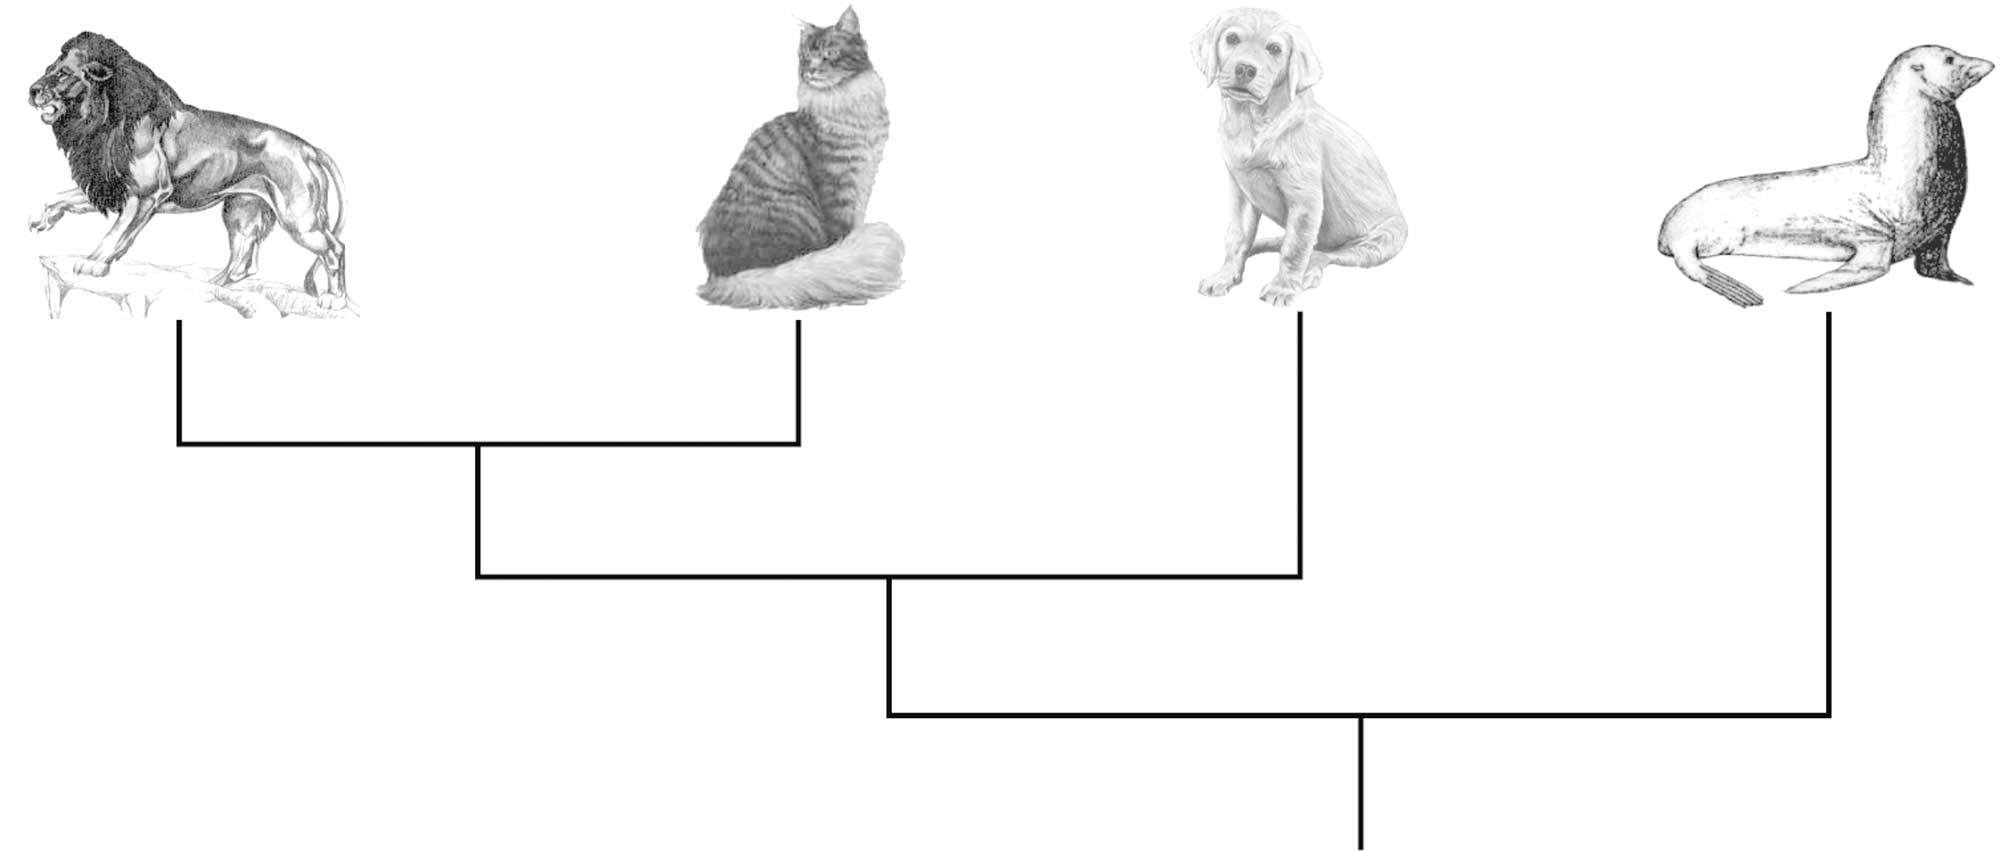 Illustration showing the phylogenetic relationships of a lion, cat, dog, and seal.